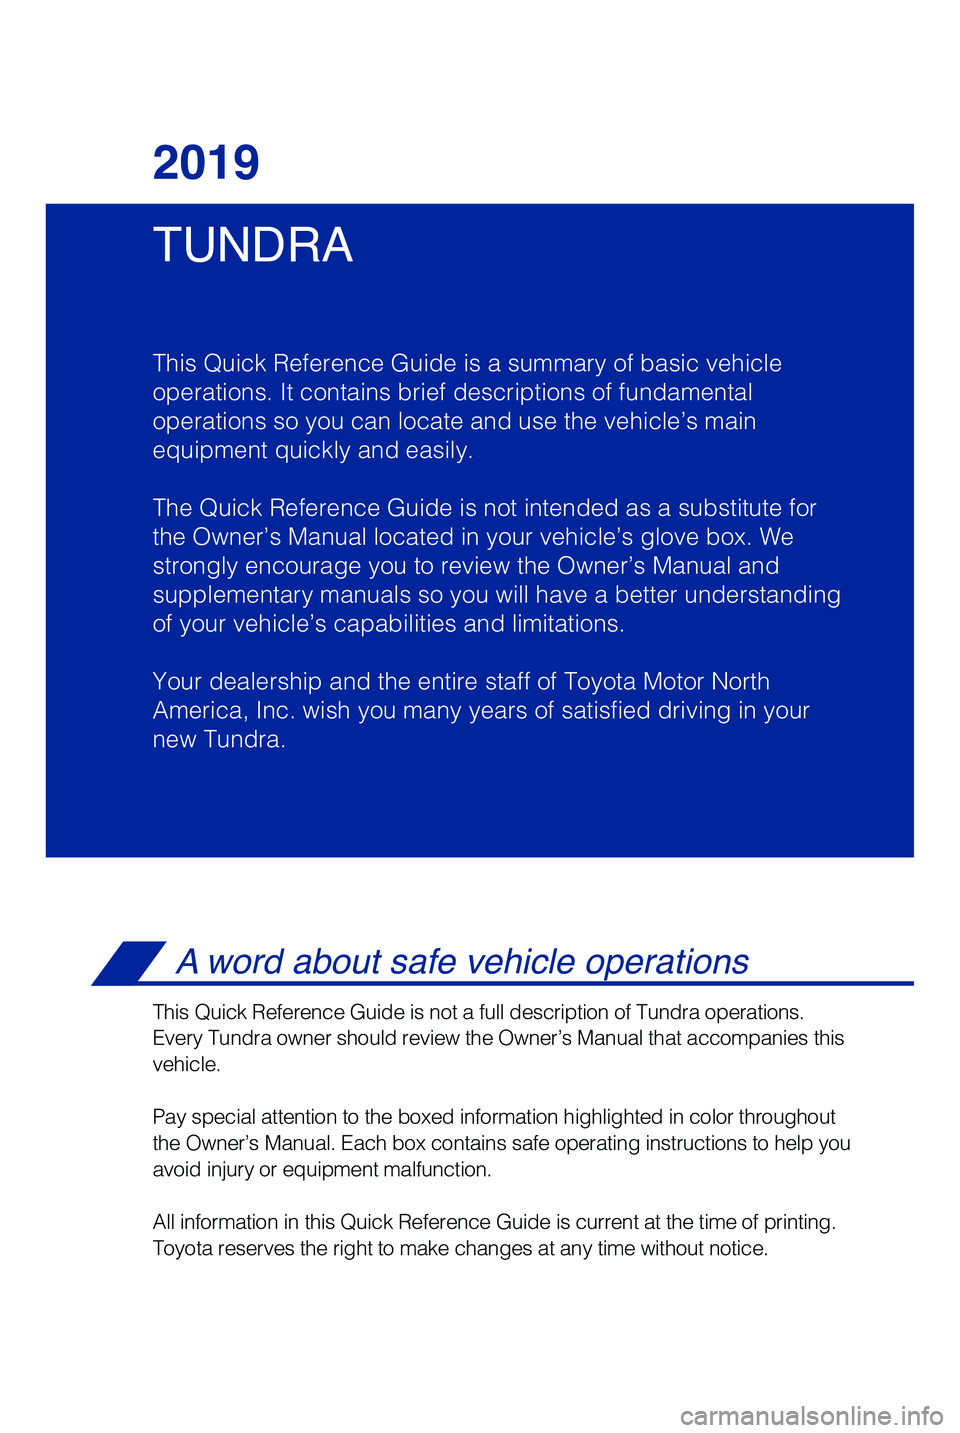 TOYOTA TUNDRA 2019  Owners Manual (in English) TUNDRA 2019
This Quick Reference Guide is a summary of basic vehicle
operations. It contains brief descriptions of fundamental
operations so you can locate and use the vehicle’s main 
equipment quic